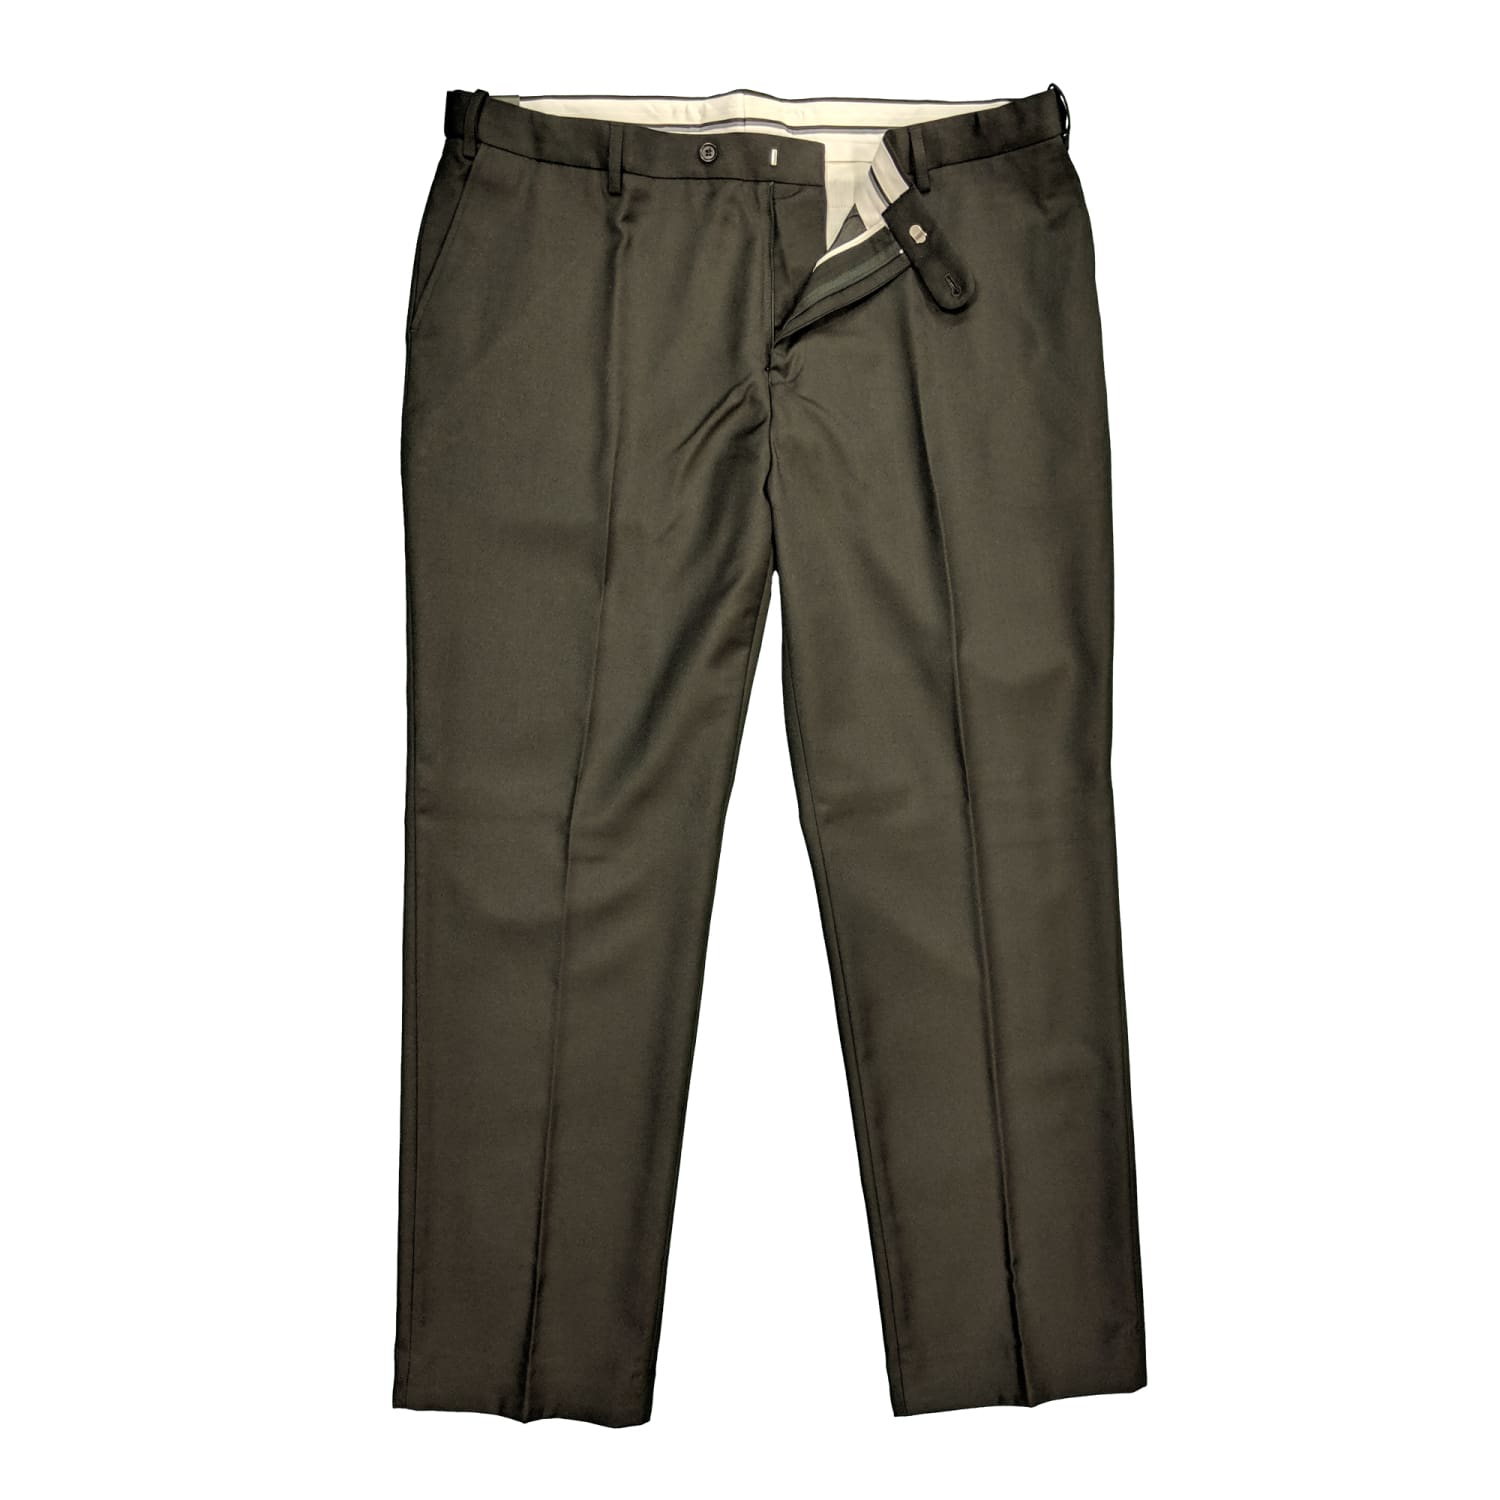 Skopes Trousers - MM7330 - Wexford - Black 1